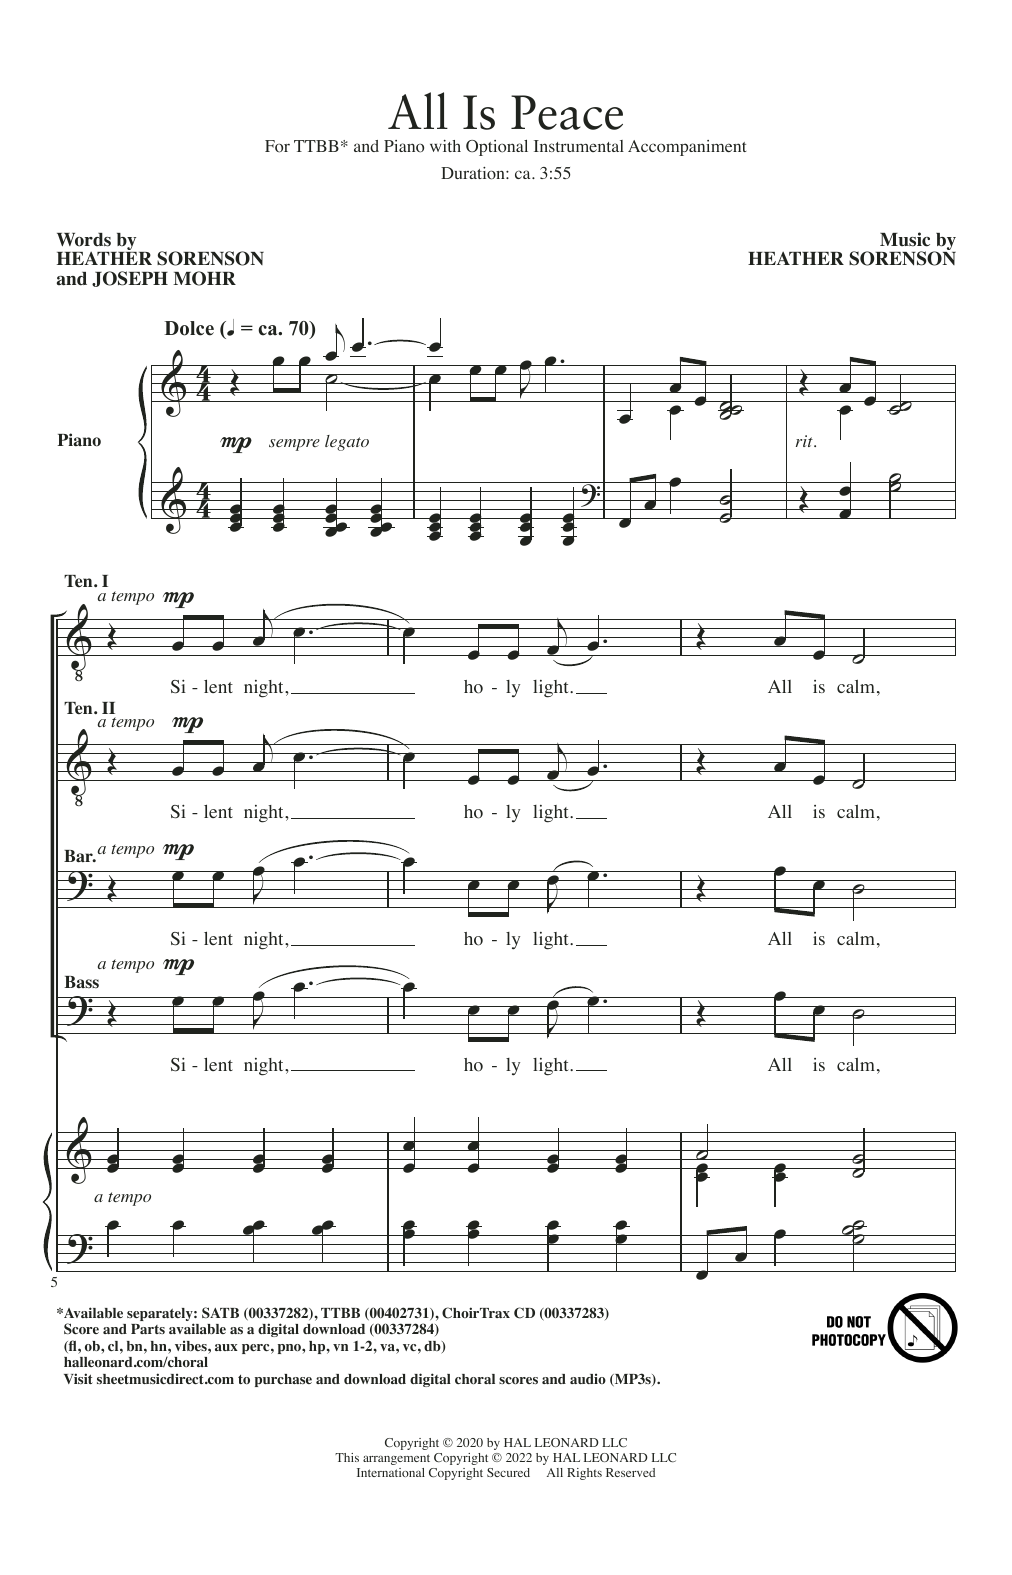 Download Heather Sorenson and Joseph Mohr All Is Peace Sheet Music